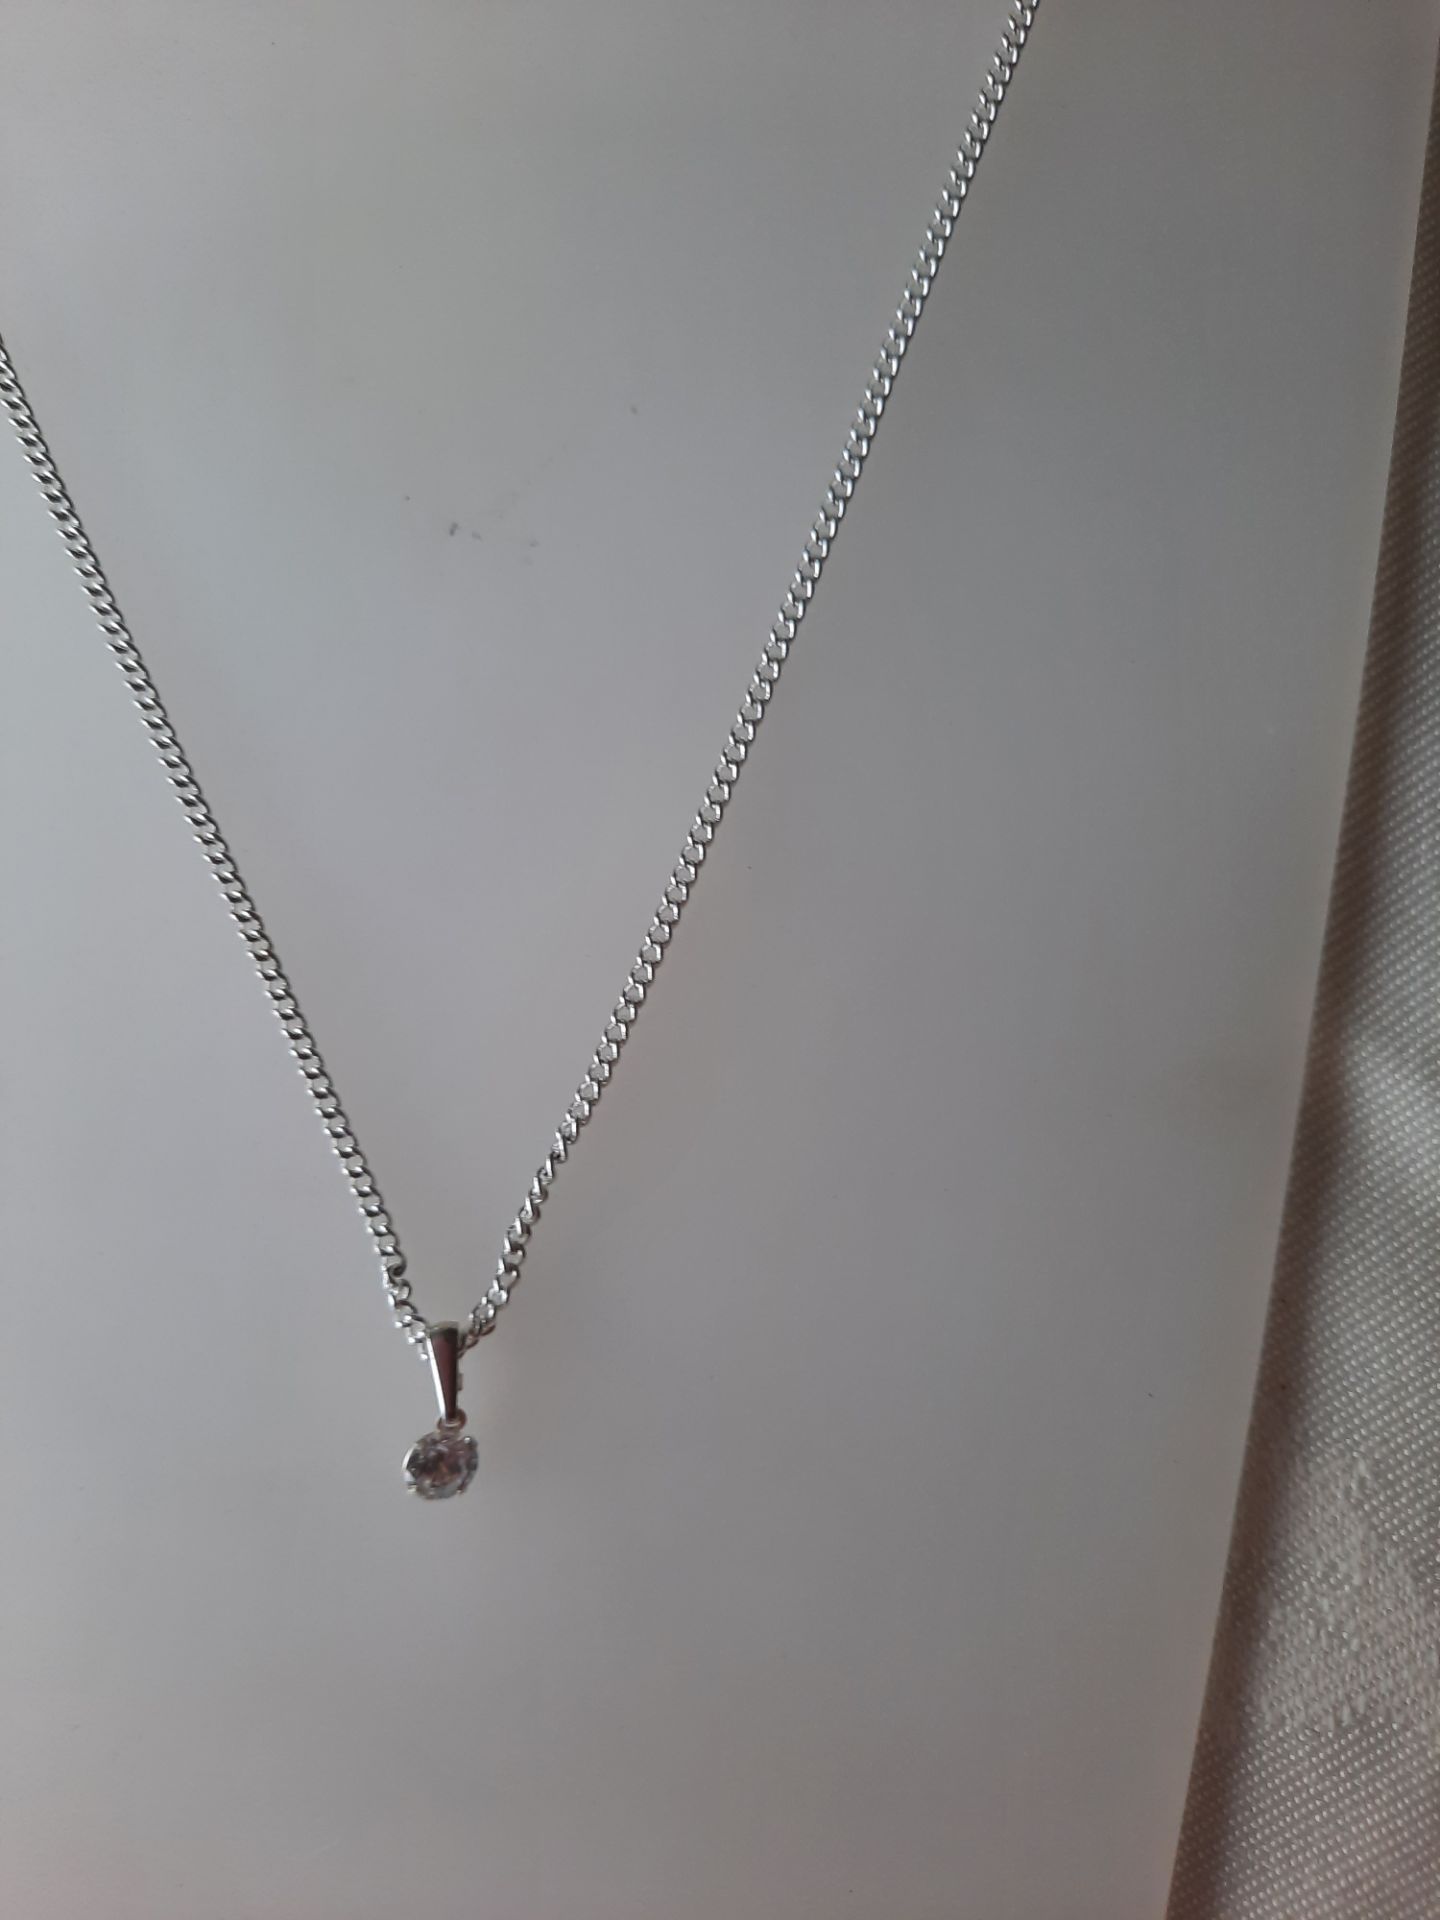 Silver Necklace With Pretty Cz Stone. RRP £34.99 - Image 2 of 2